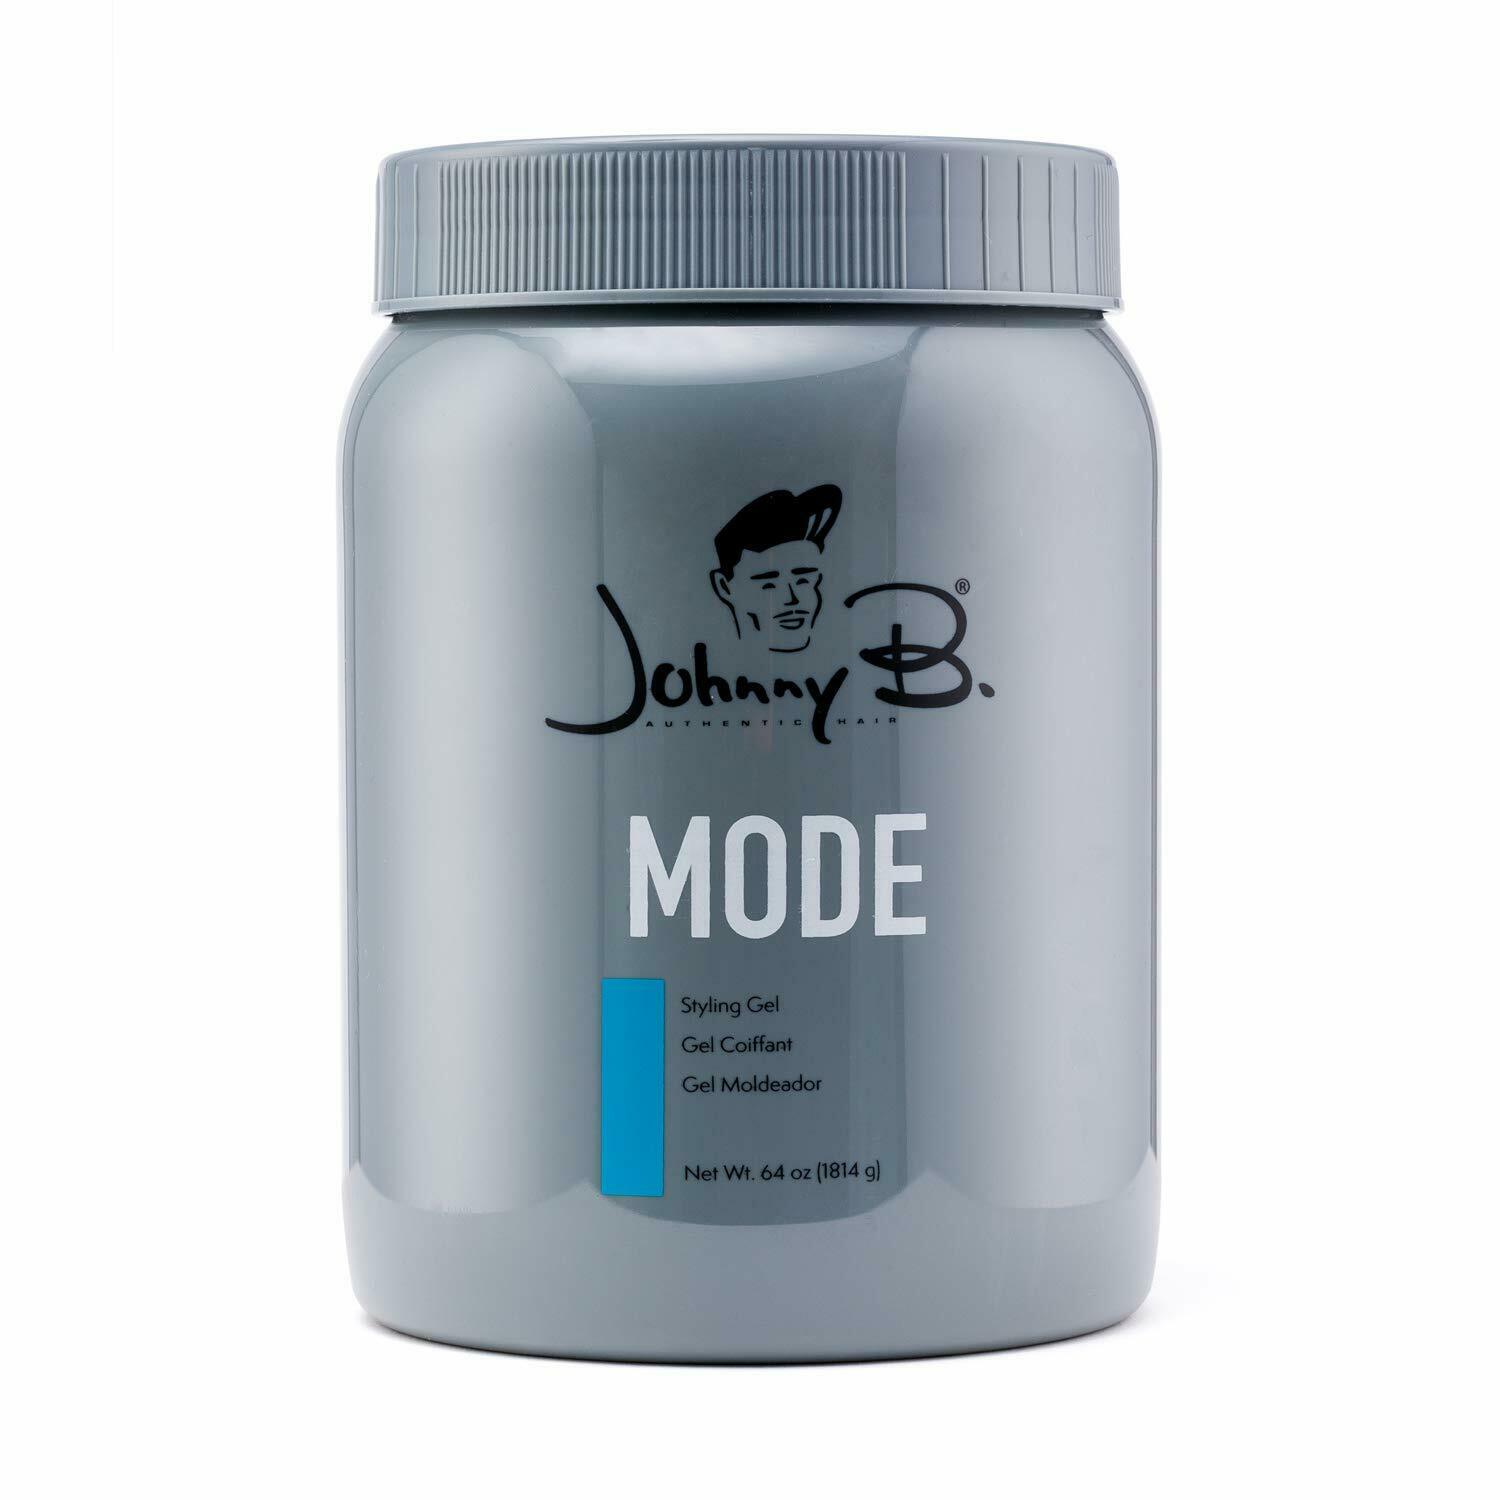 Johnny B Mode Styling Hair Gel 64 Oz  Mode  Non Alcohol  New Container Fresh